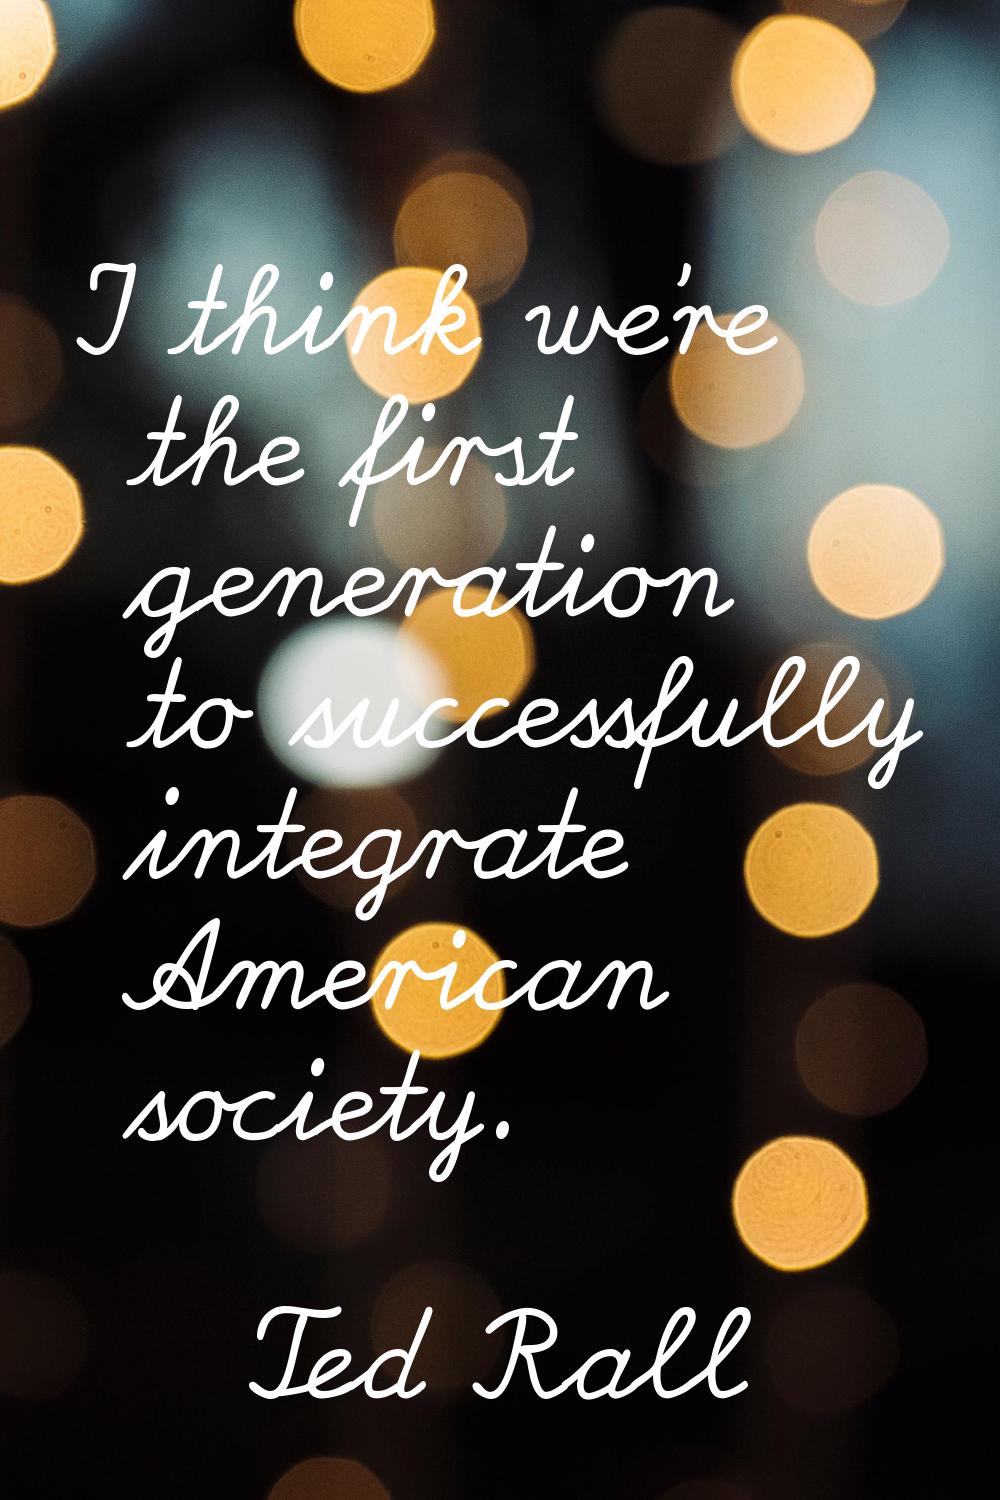 I think we're the first generation to successfully integrate American society.